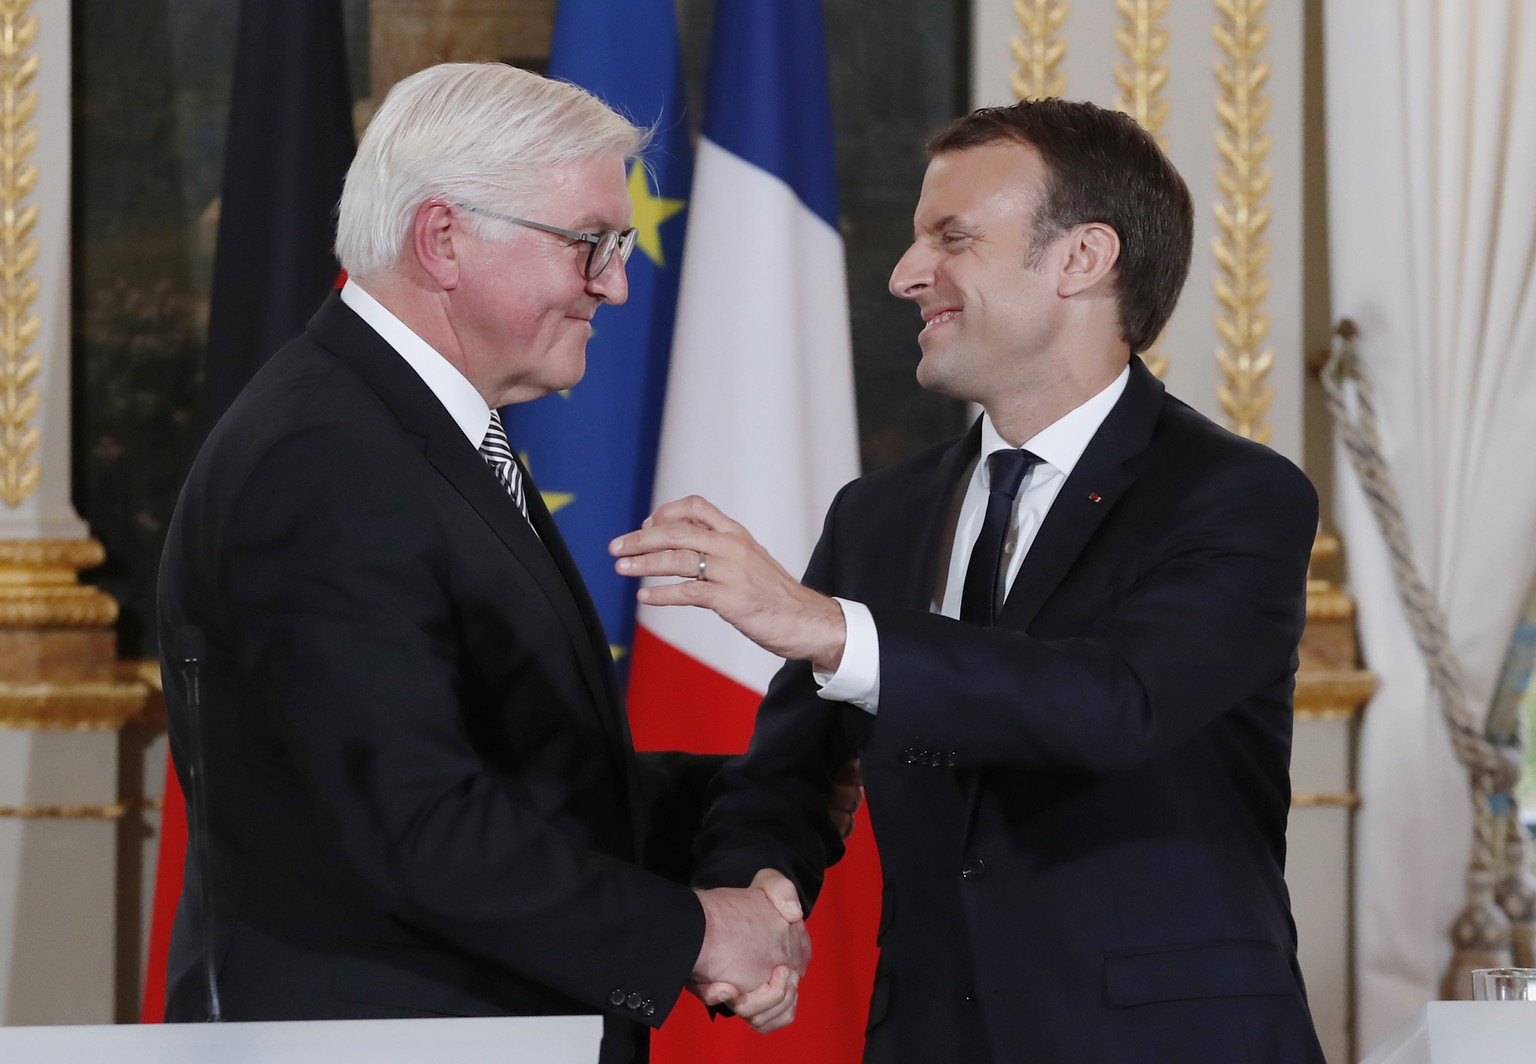 German President Frank-Walter Steinmeier, left, and French President Emmanuel Macron shake hands after a media conference at the Elysee Palace in Paris, France, Friday, Nov. 10, 2017. Frank-Walter Ste ...